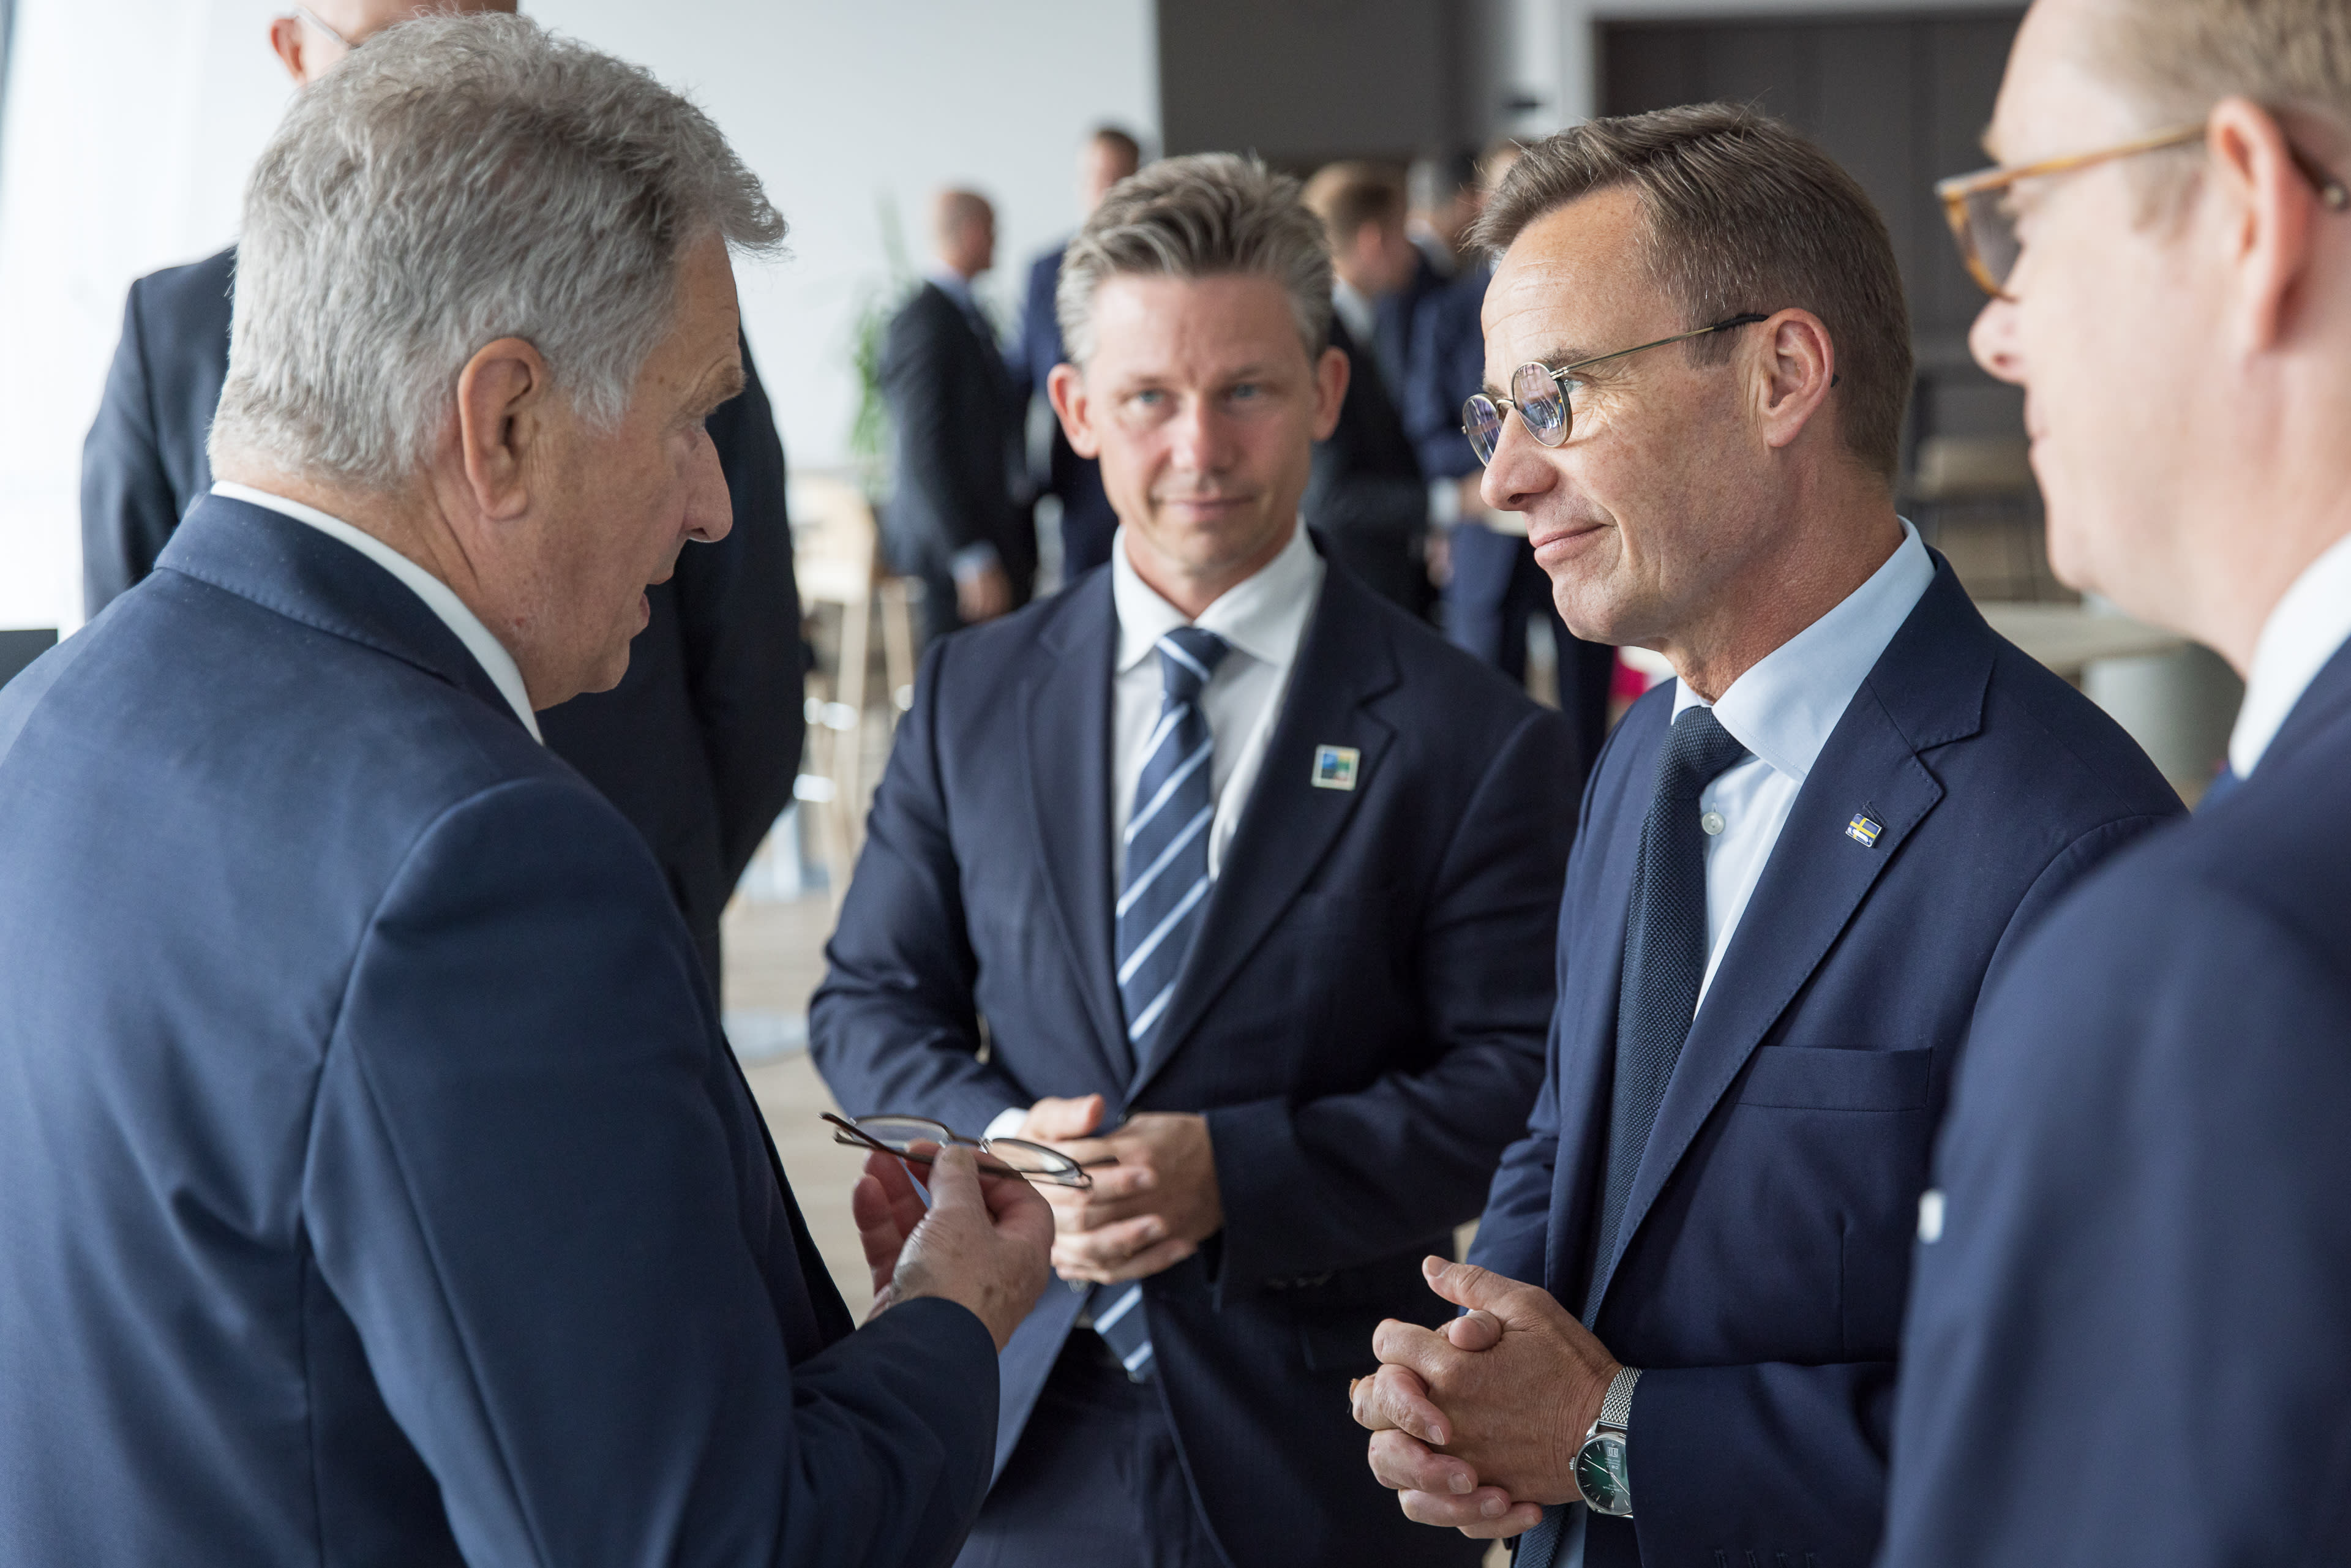 Finnish leaders welcome Sweden to NATO